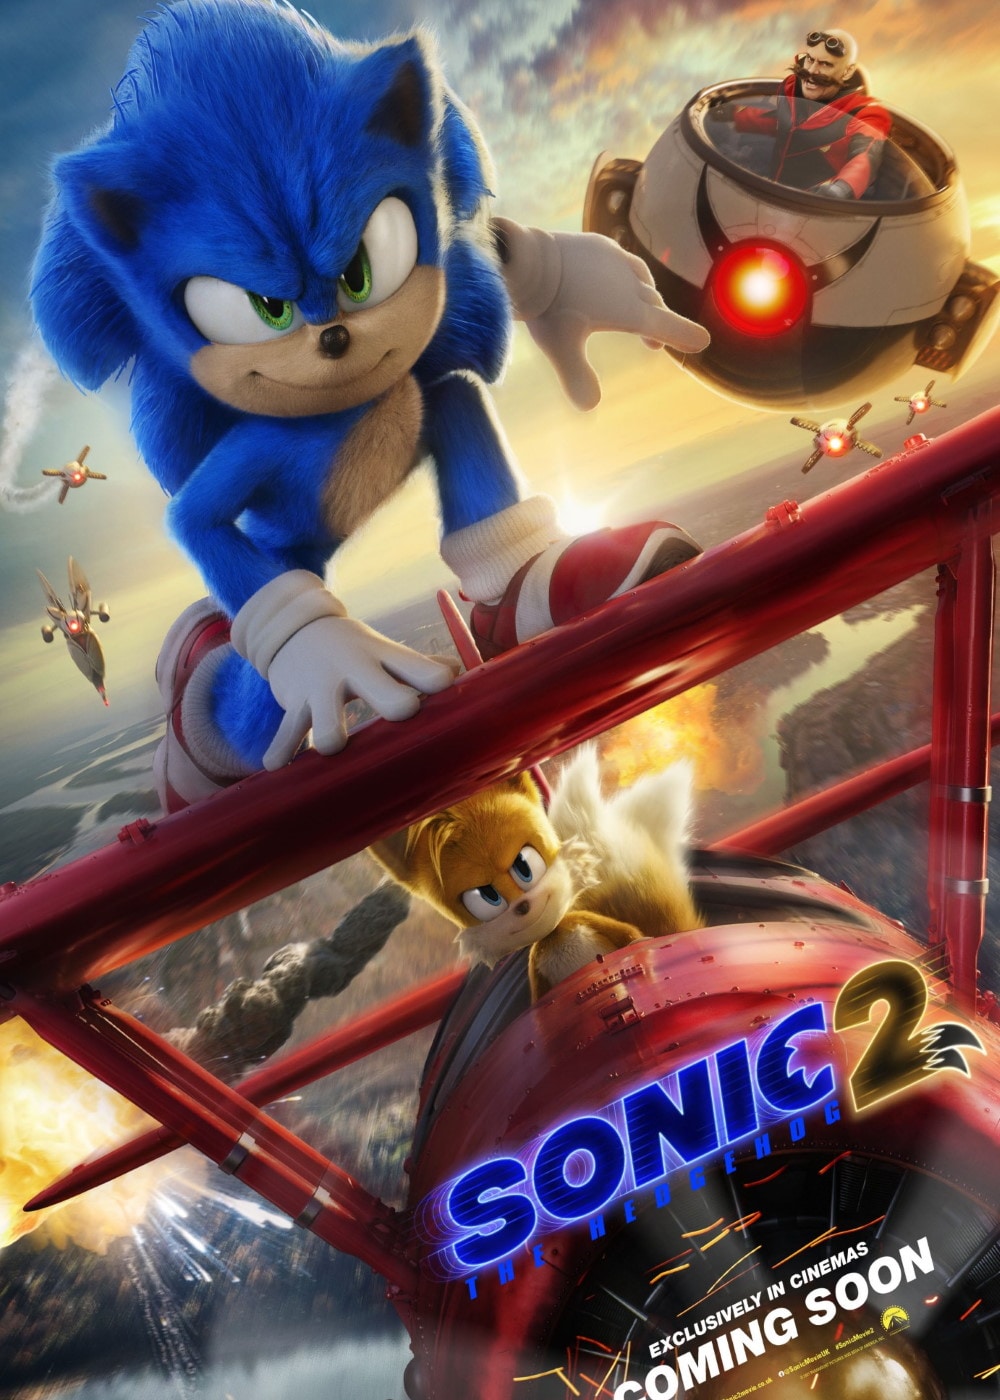 Watch Sonic The Hedgehog 2 Movie Collection